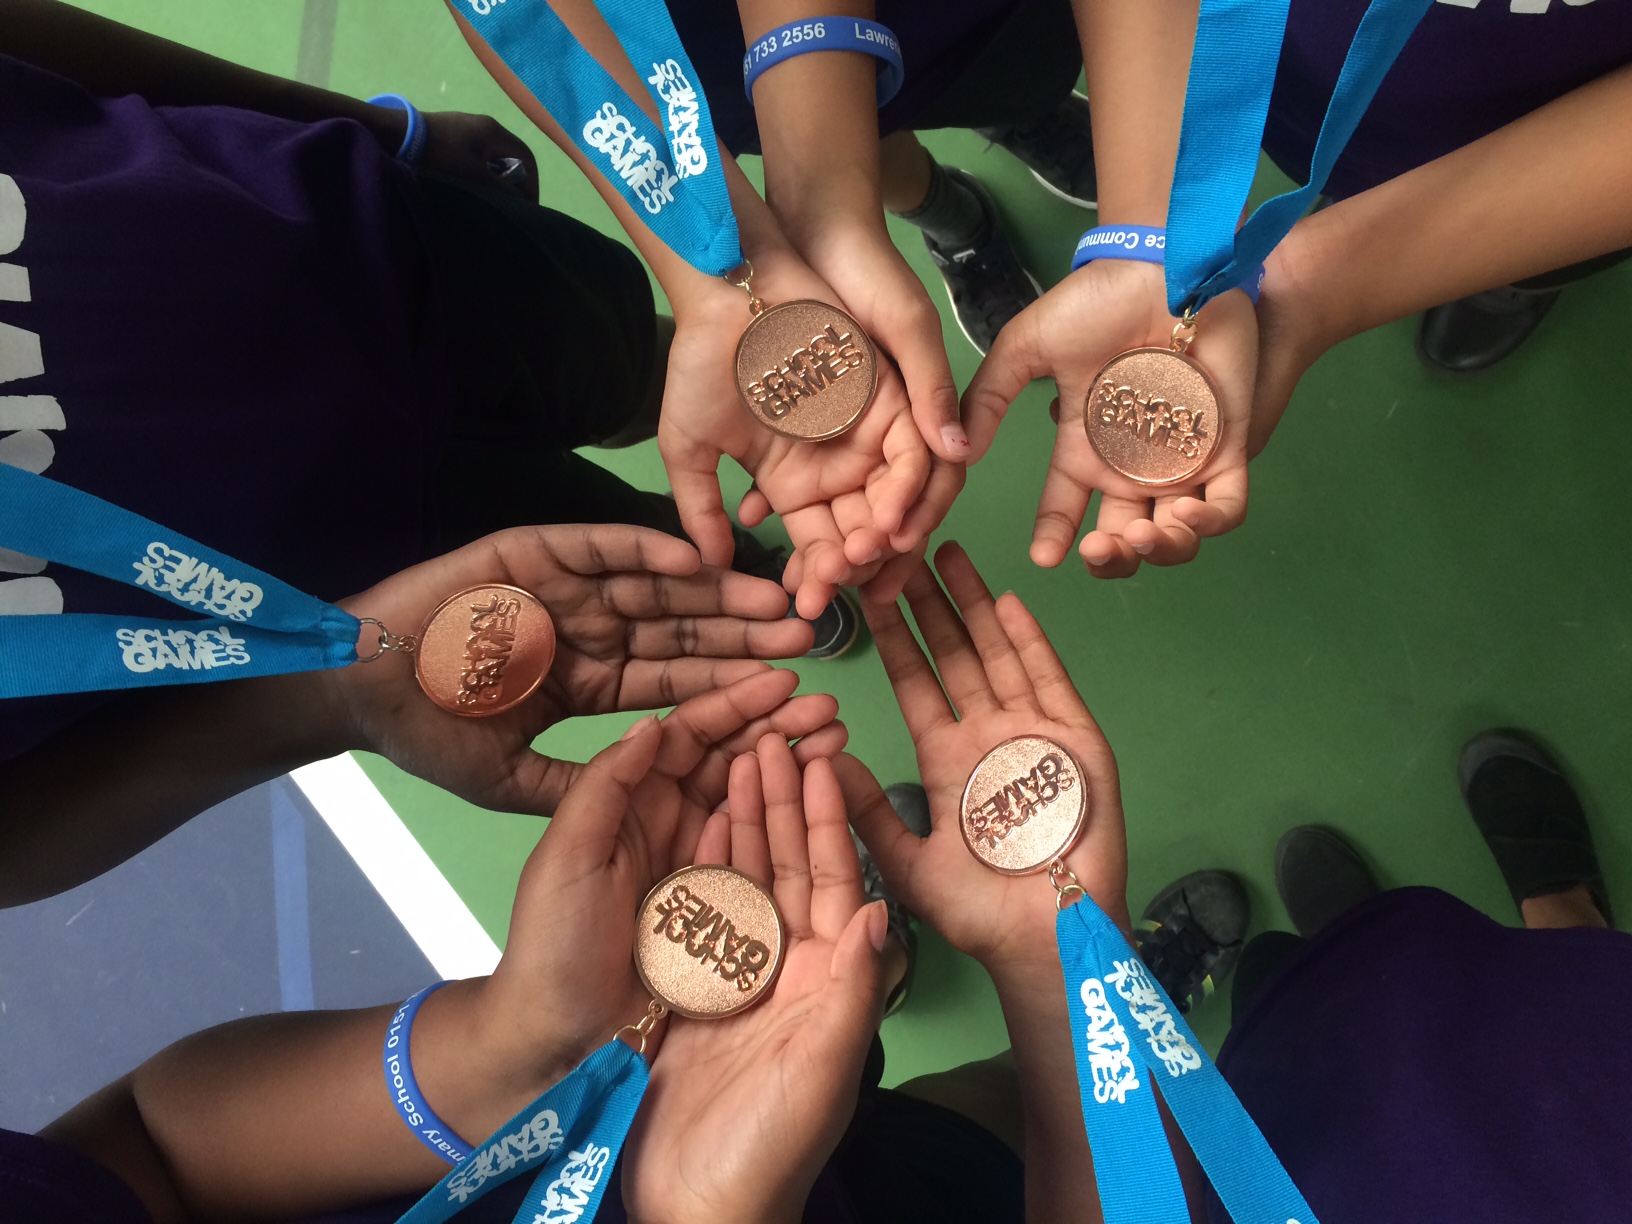 MSP School Games participants hold medals in their hands MSP